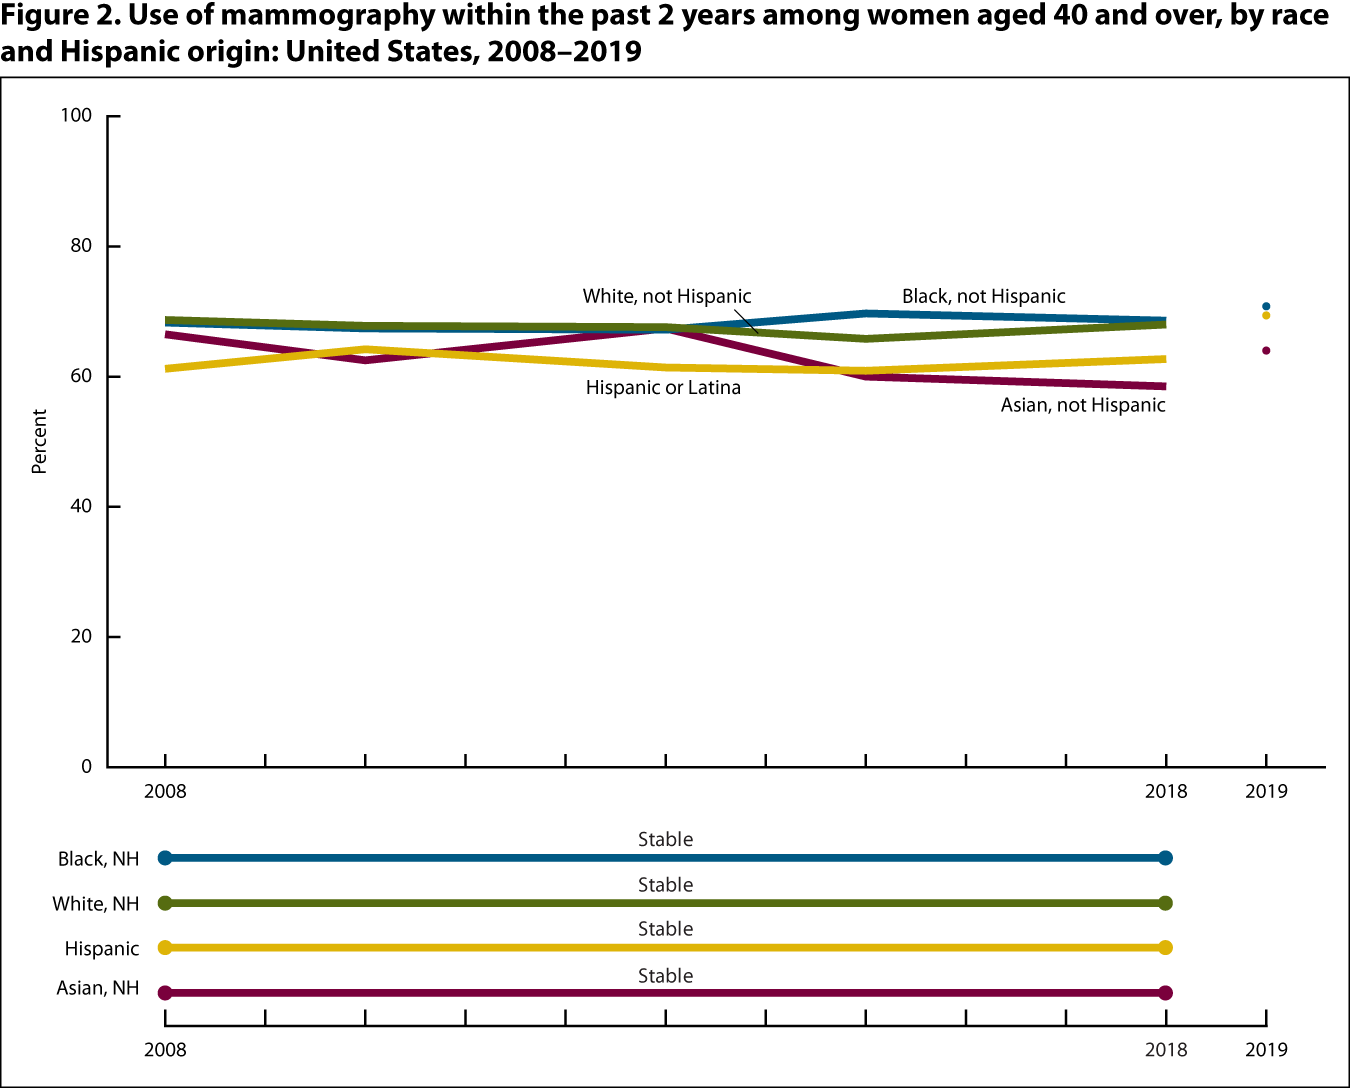 Figure 2 is line graph showing the percentage of women aged 40 and over who self-reported mammogram use within the past 2 years, by race and Hispanic origin for 2008 through 2018 (line) and at 2019 (point).